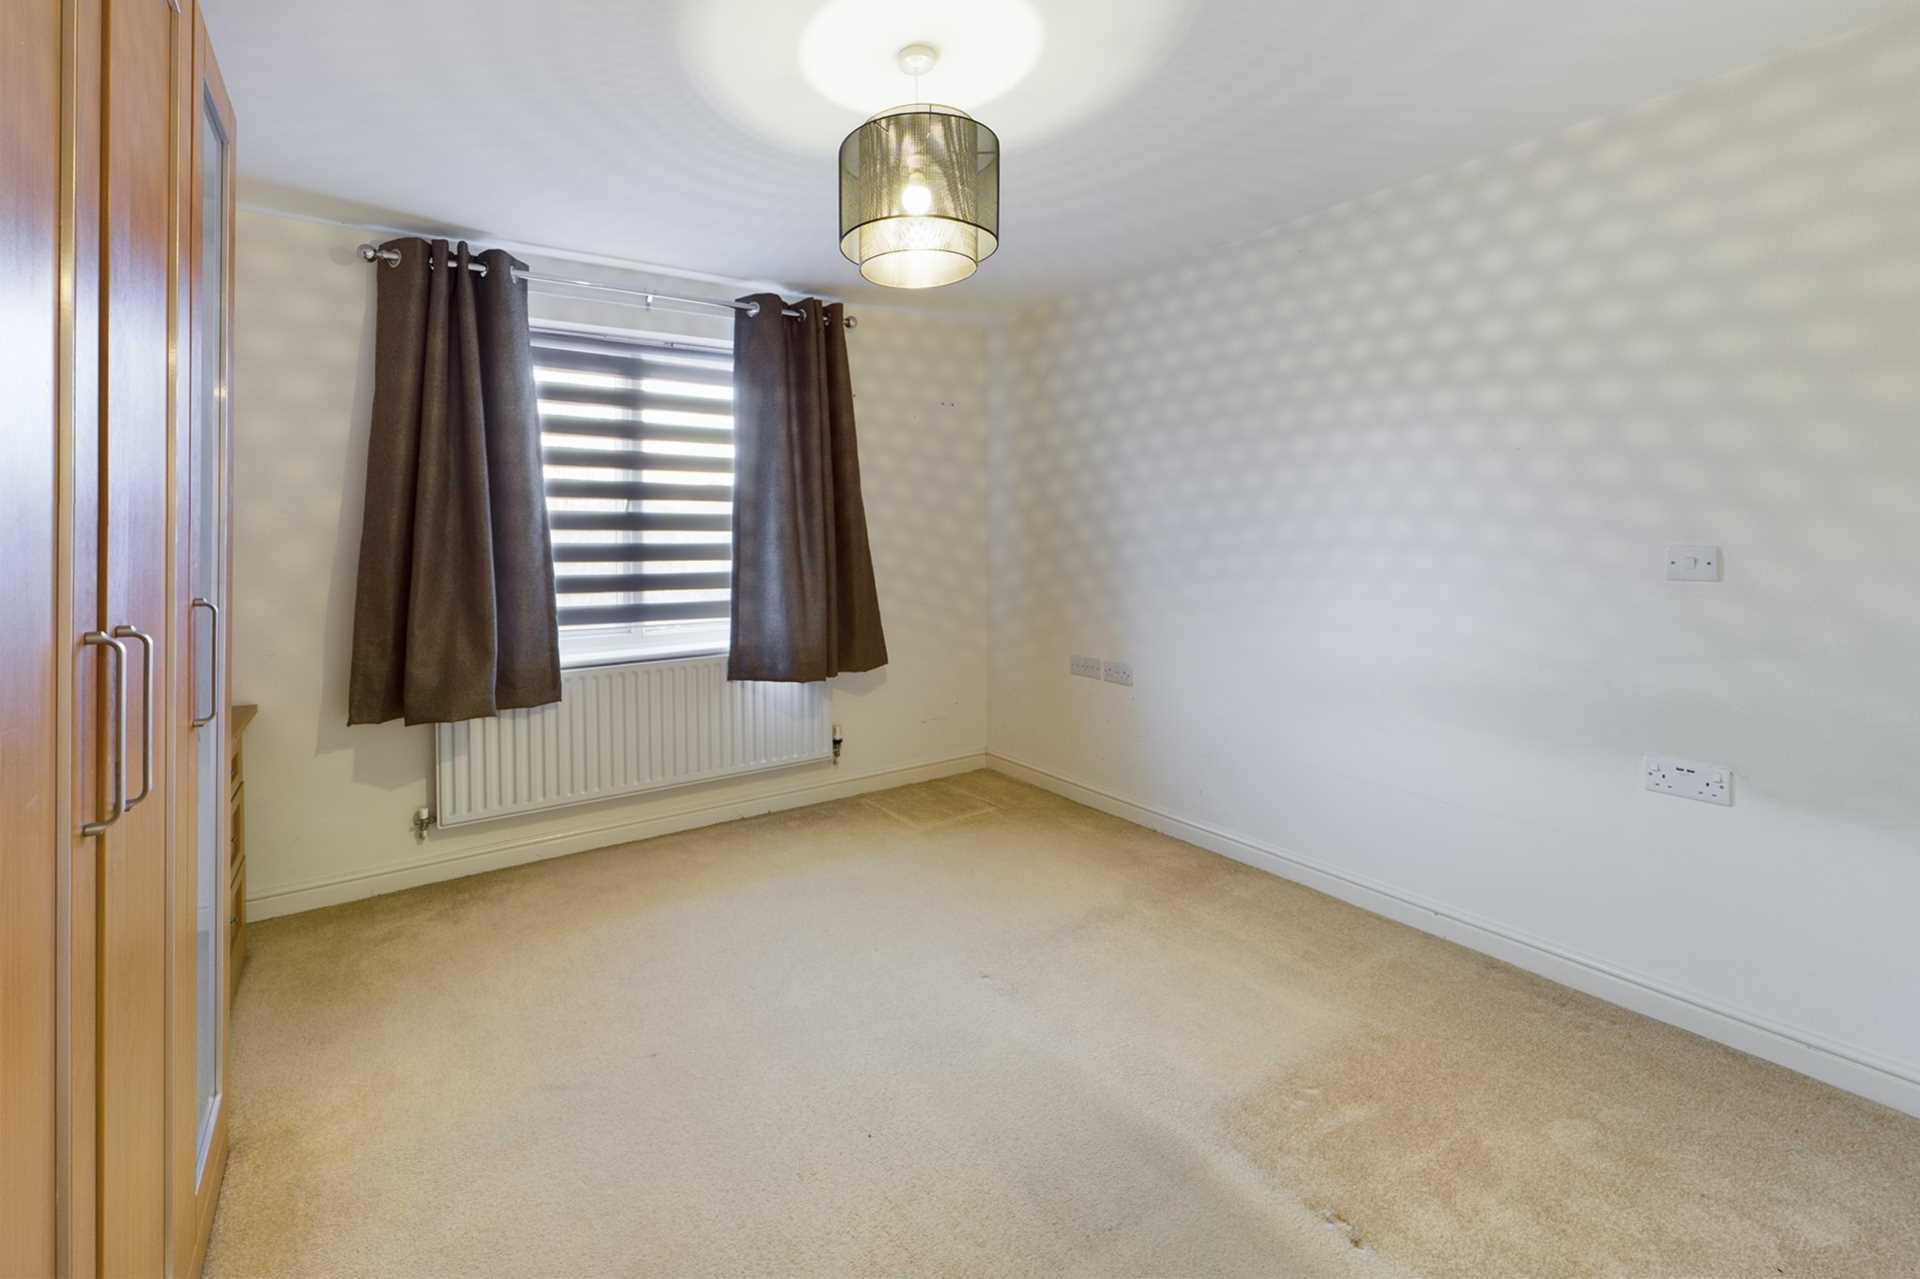 Harkness Road, Hemel Hempstead, Unfurnished, Available Now, Image 6